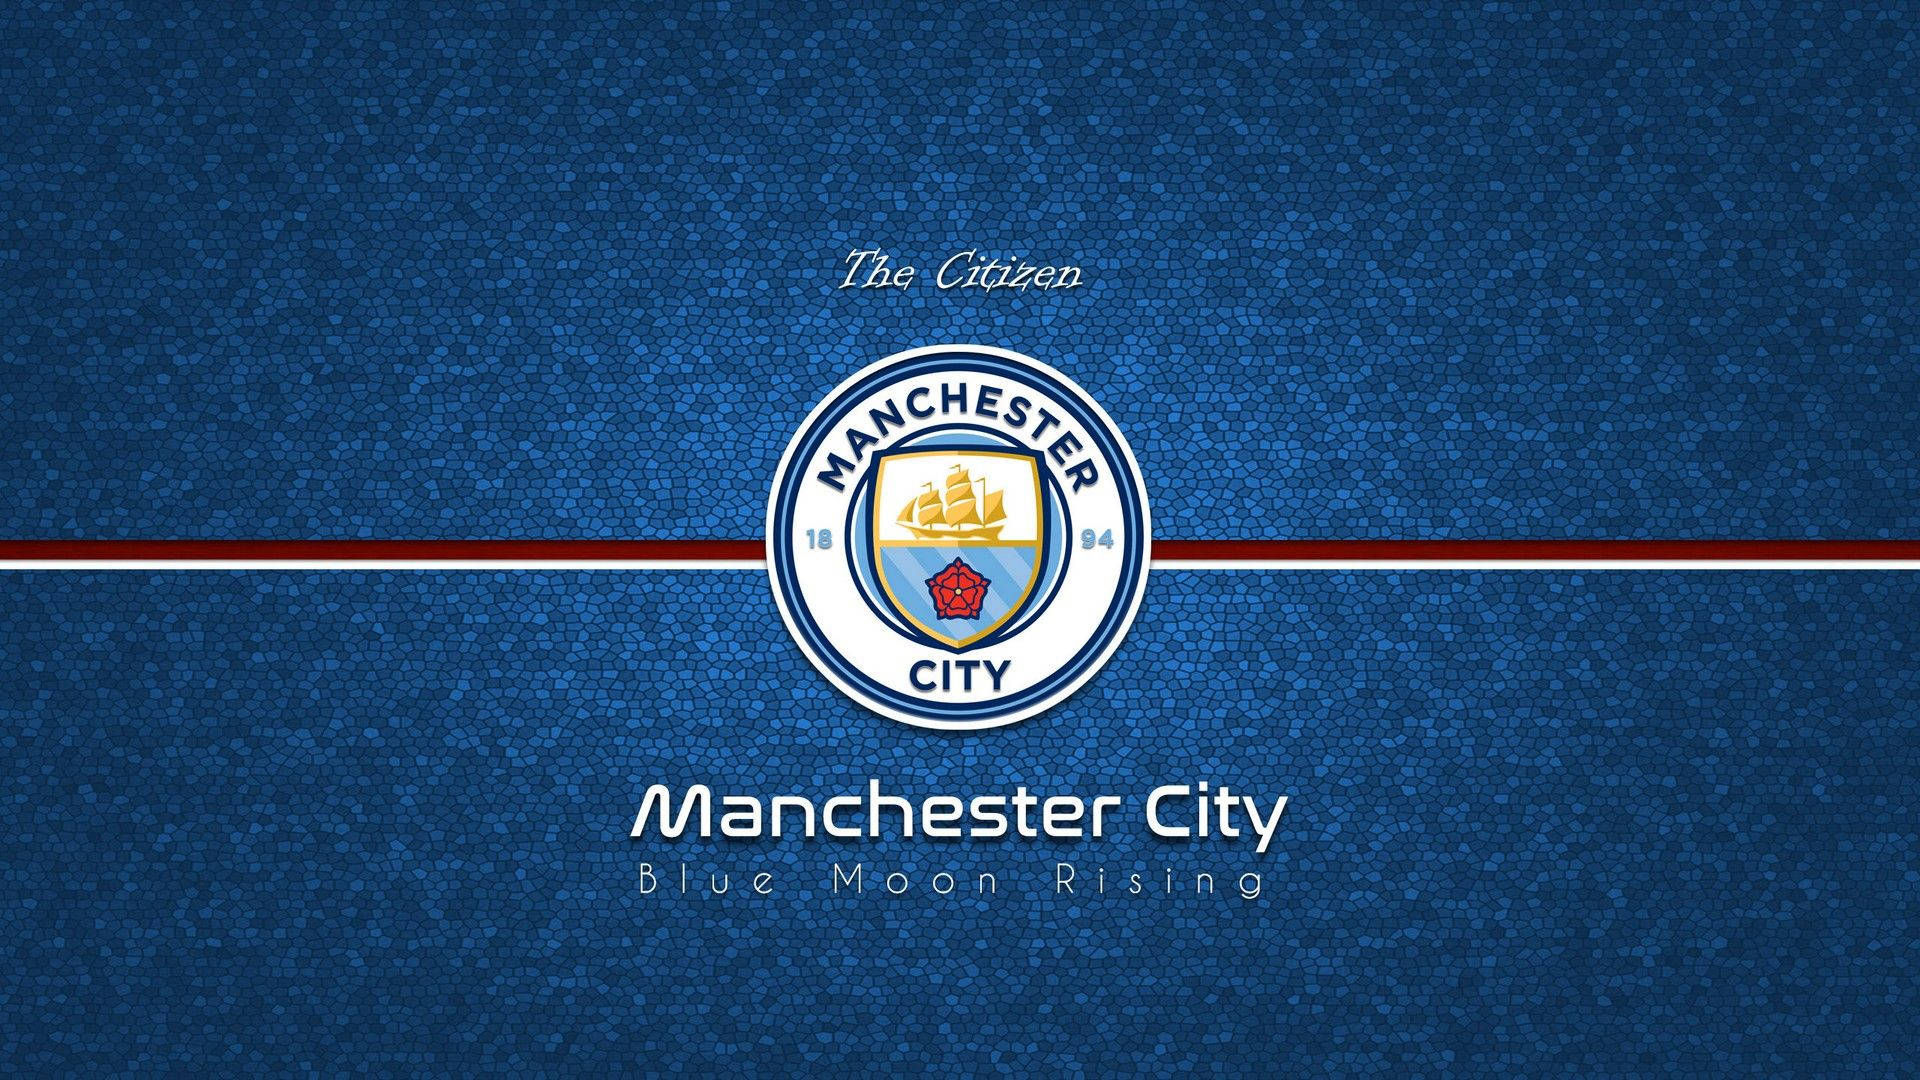 Manchester City Football Club Rises Above The Rest. Background